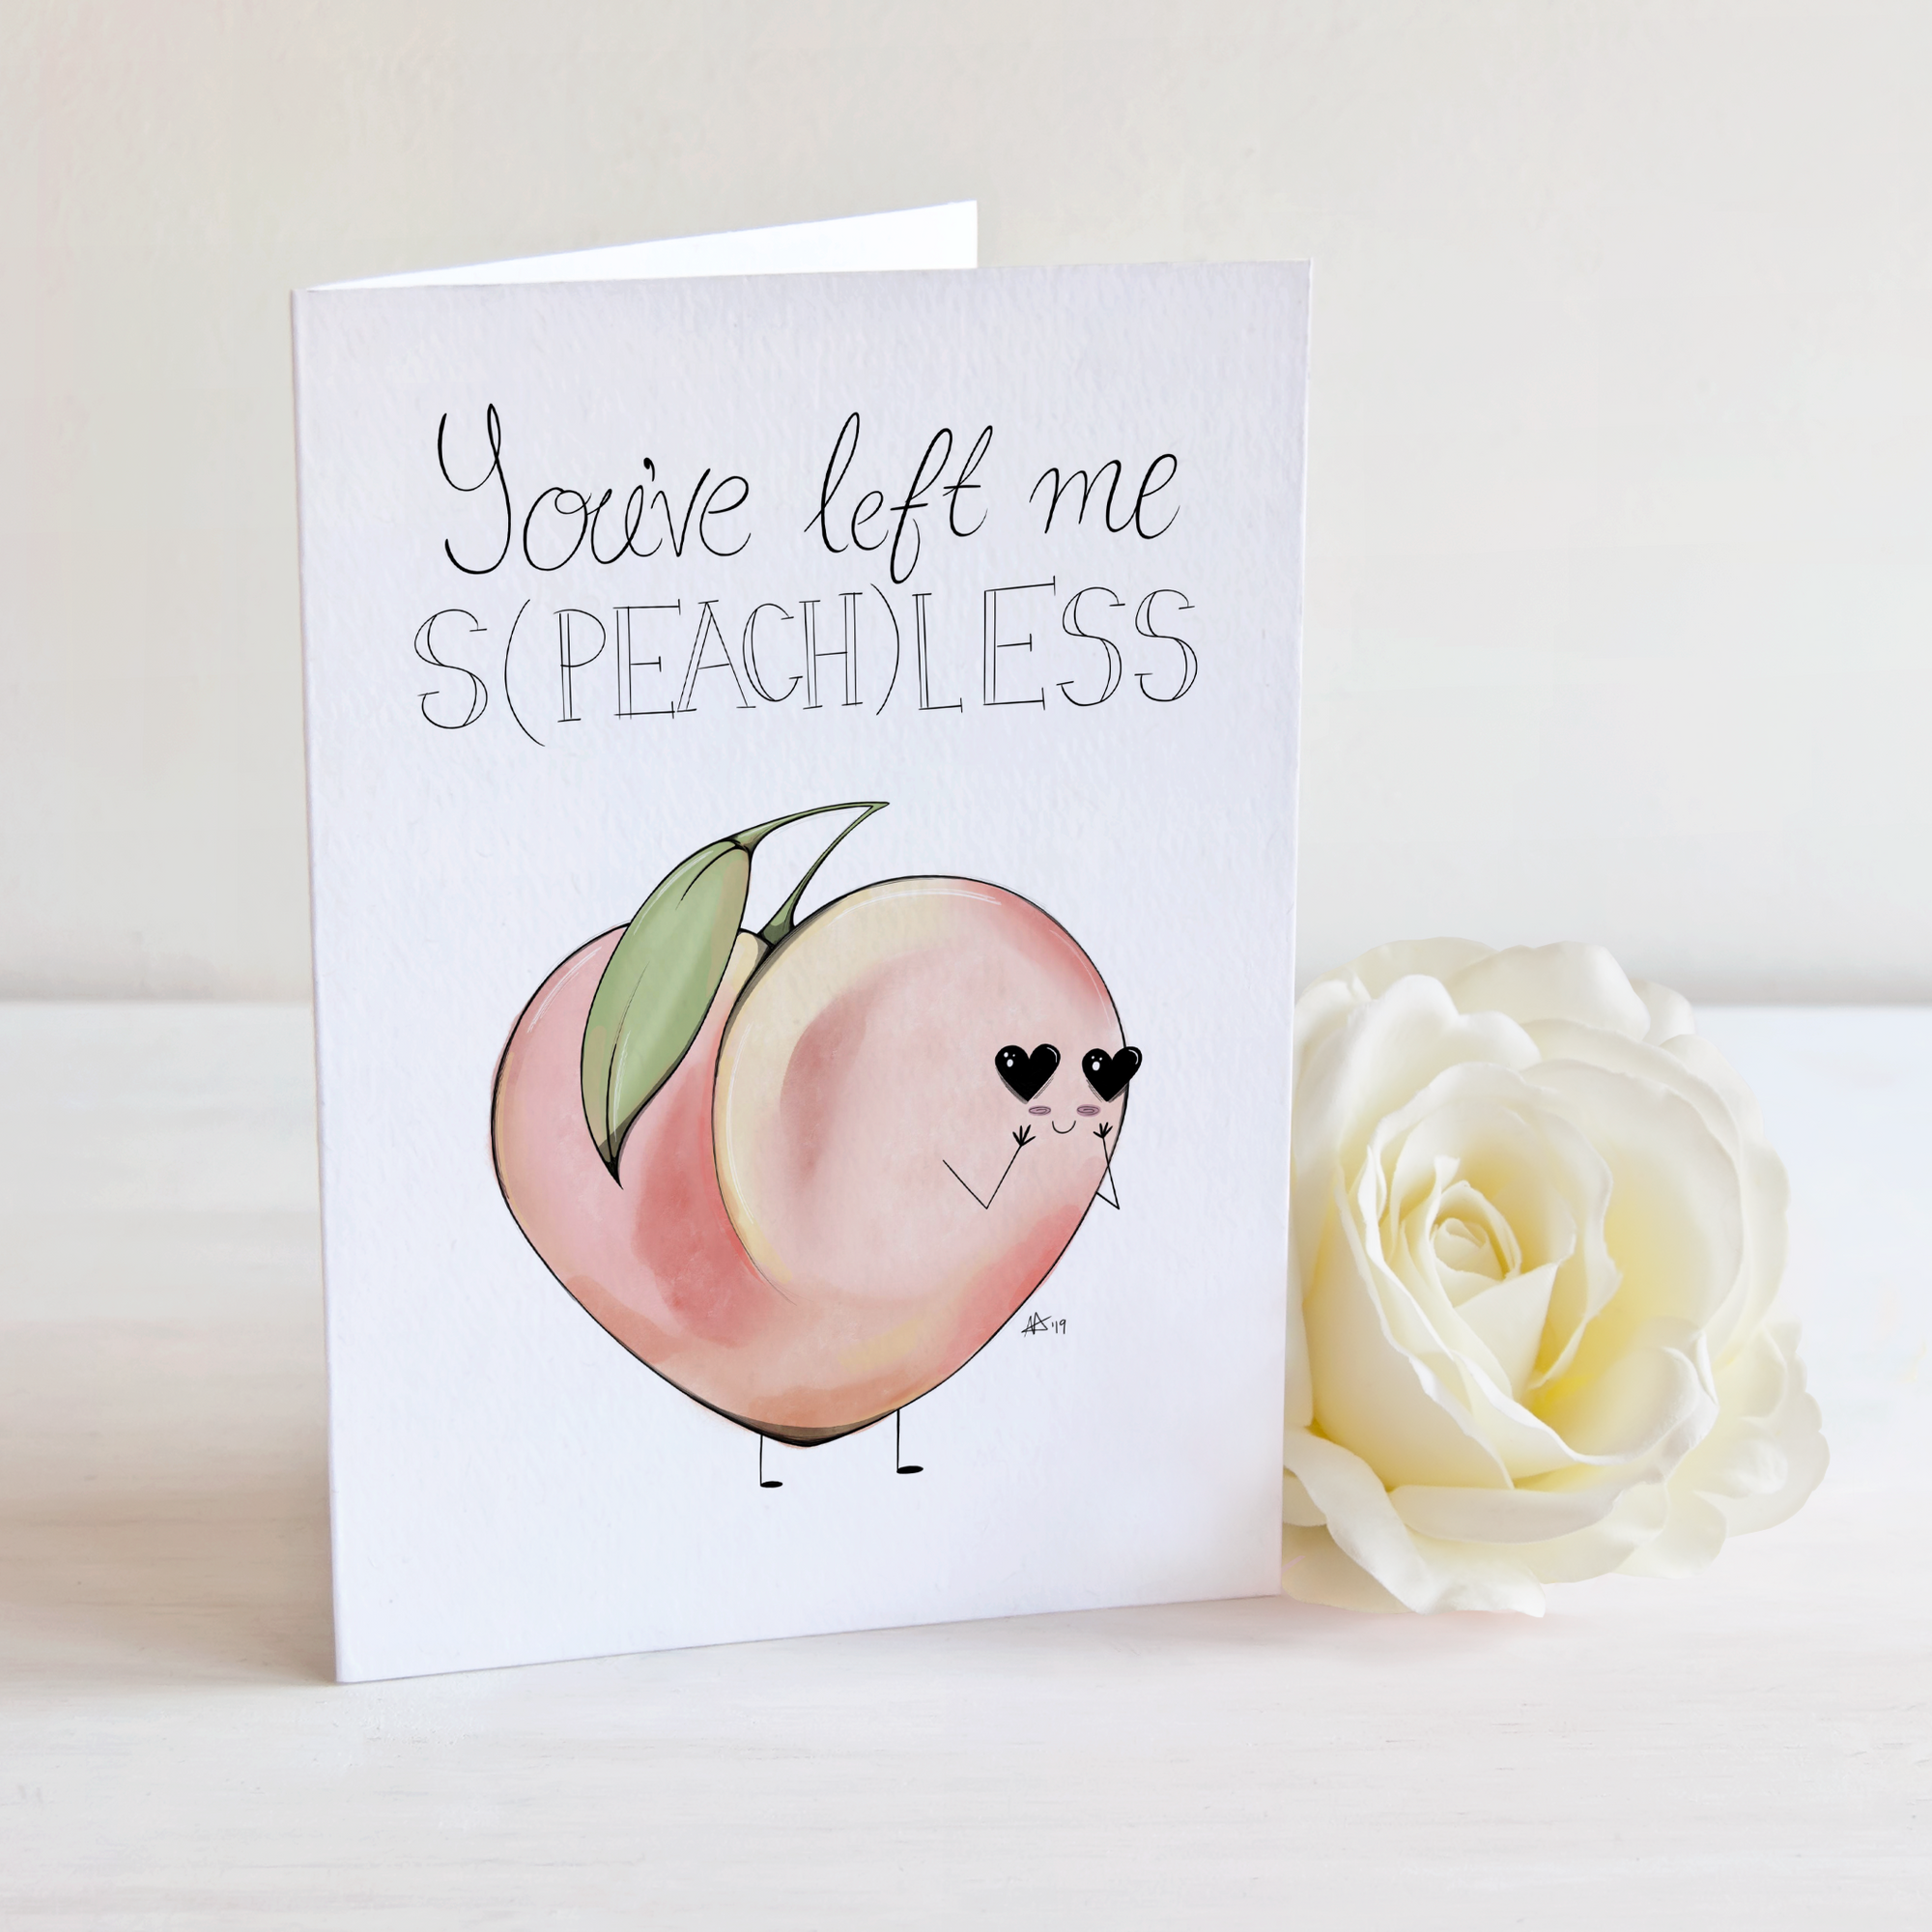 "You've left me S(PEACH)LESS" - Greeting Card / Small Print